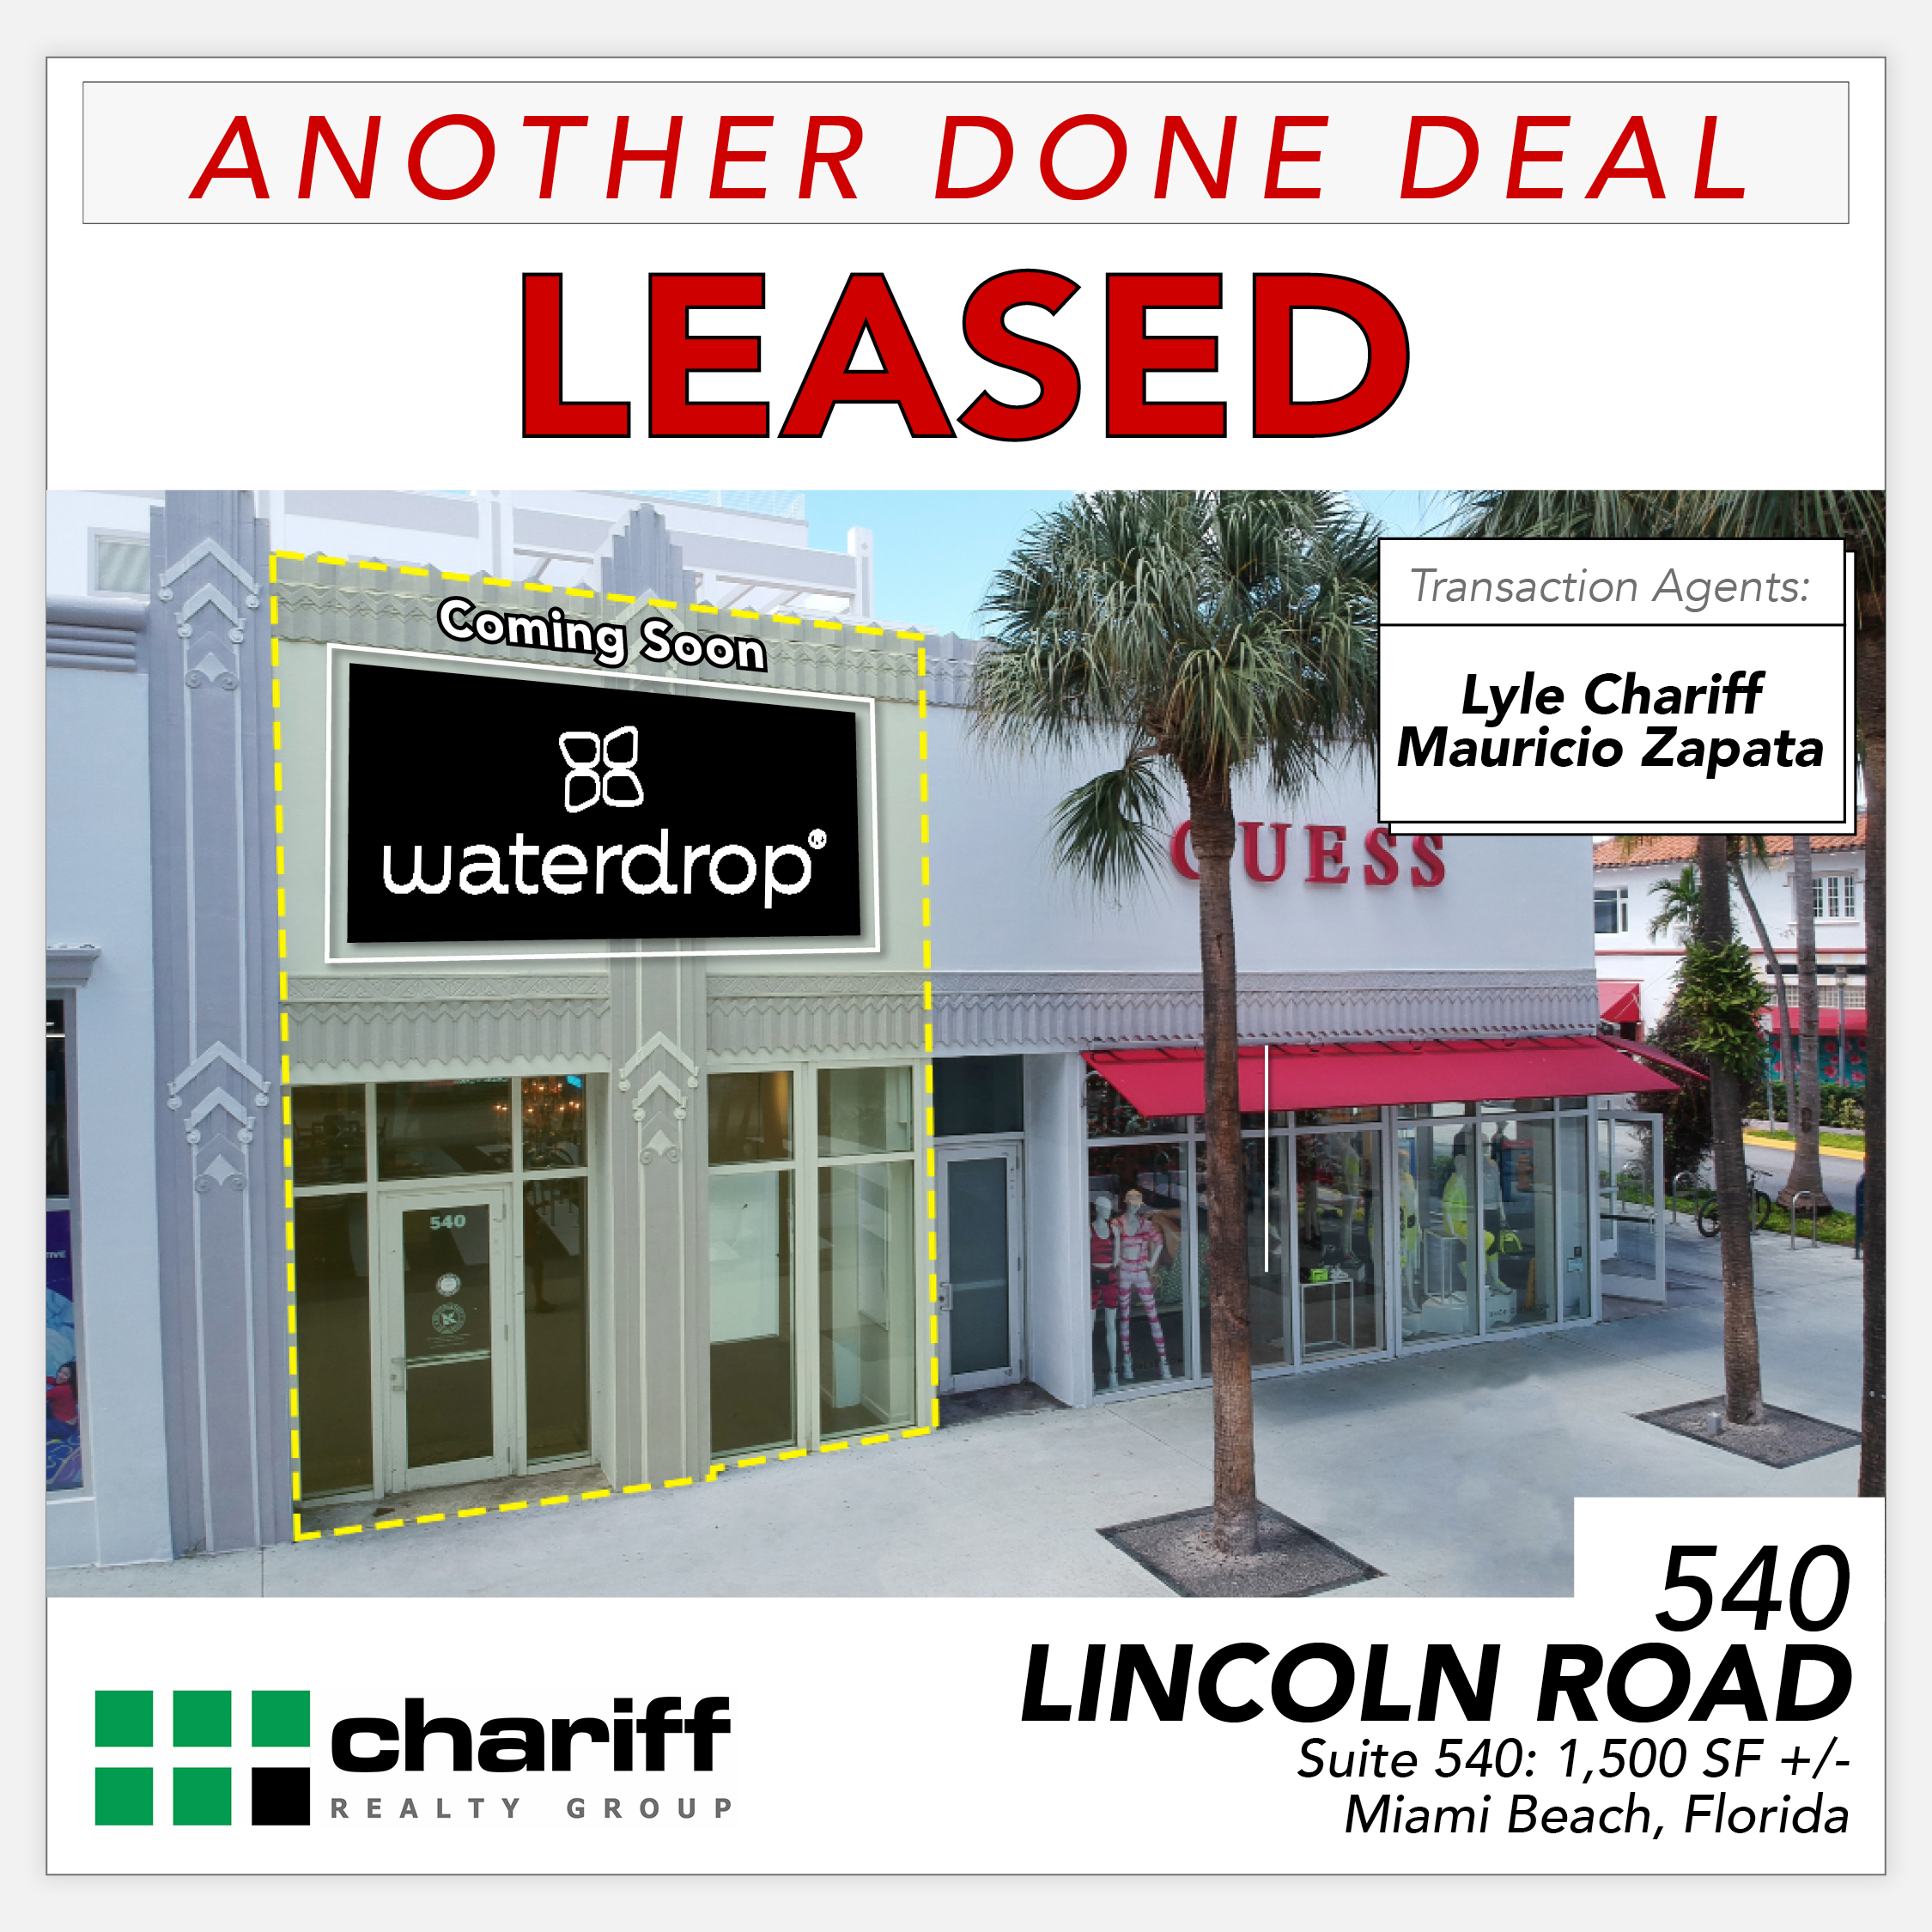 540 Lincoln Road - Another Done Deal- Leased - Lincoln Road Mall -Miami Beach -Florida-33139-Chariff Realty Group